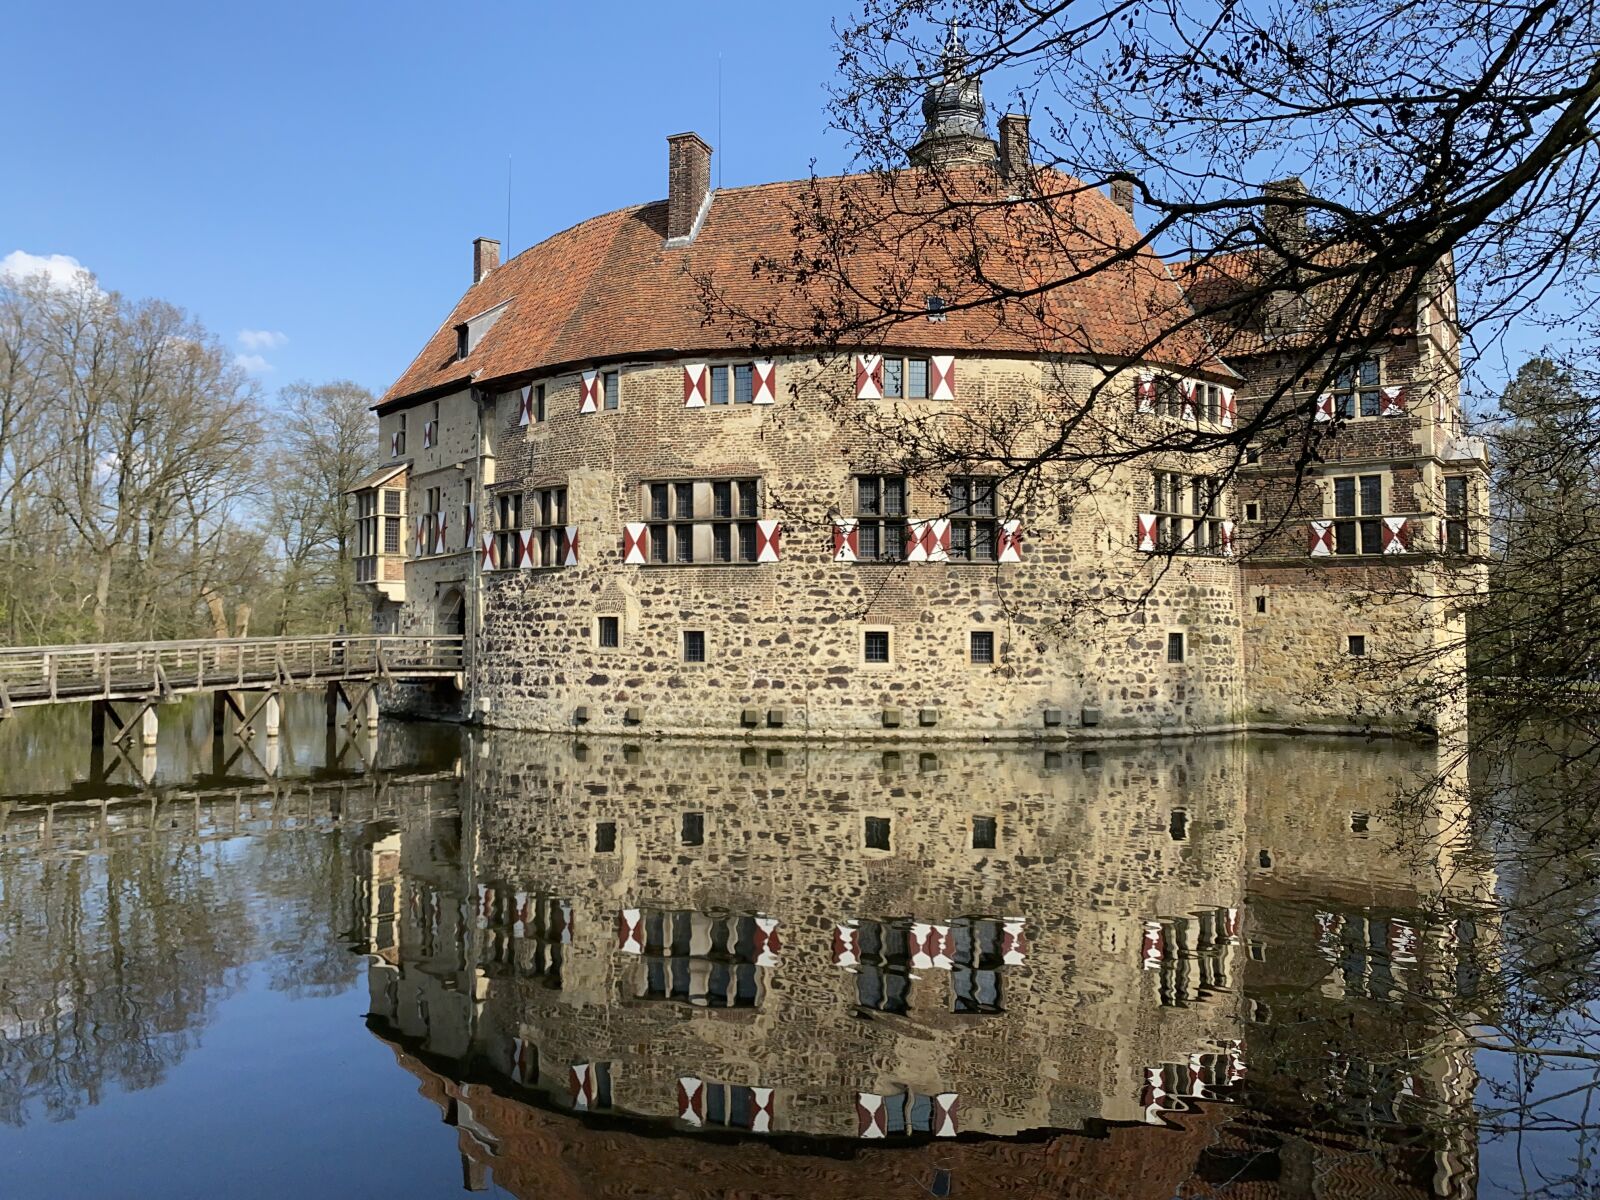 iPhone 11 Pro back camera 4.25mm f/1.8 sample photo. Castle, reflection, water photography